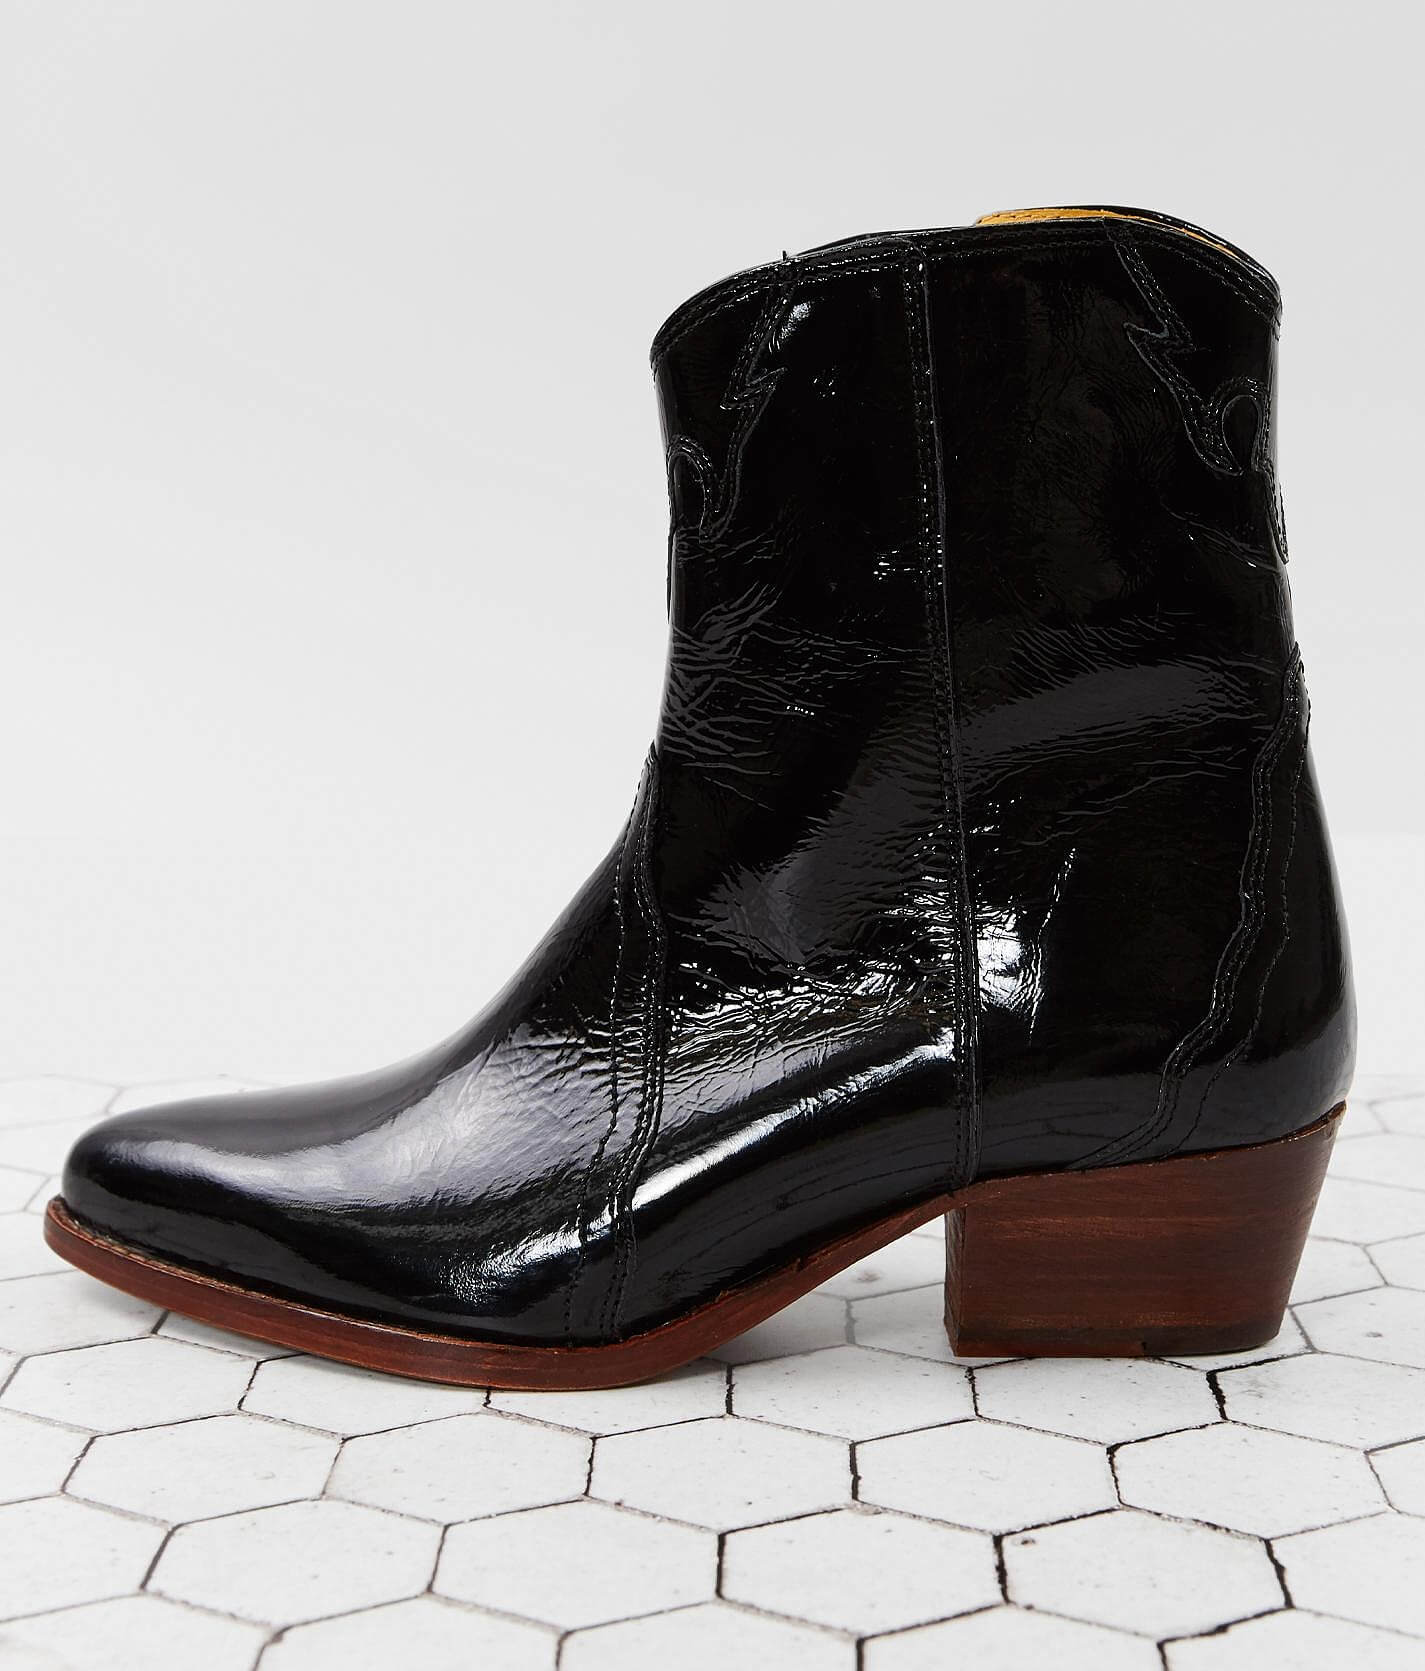 free people ankle boots